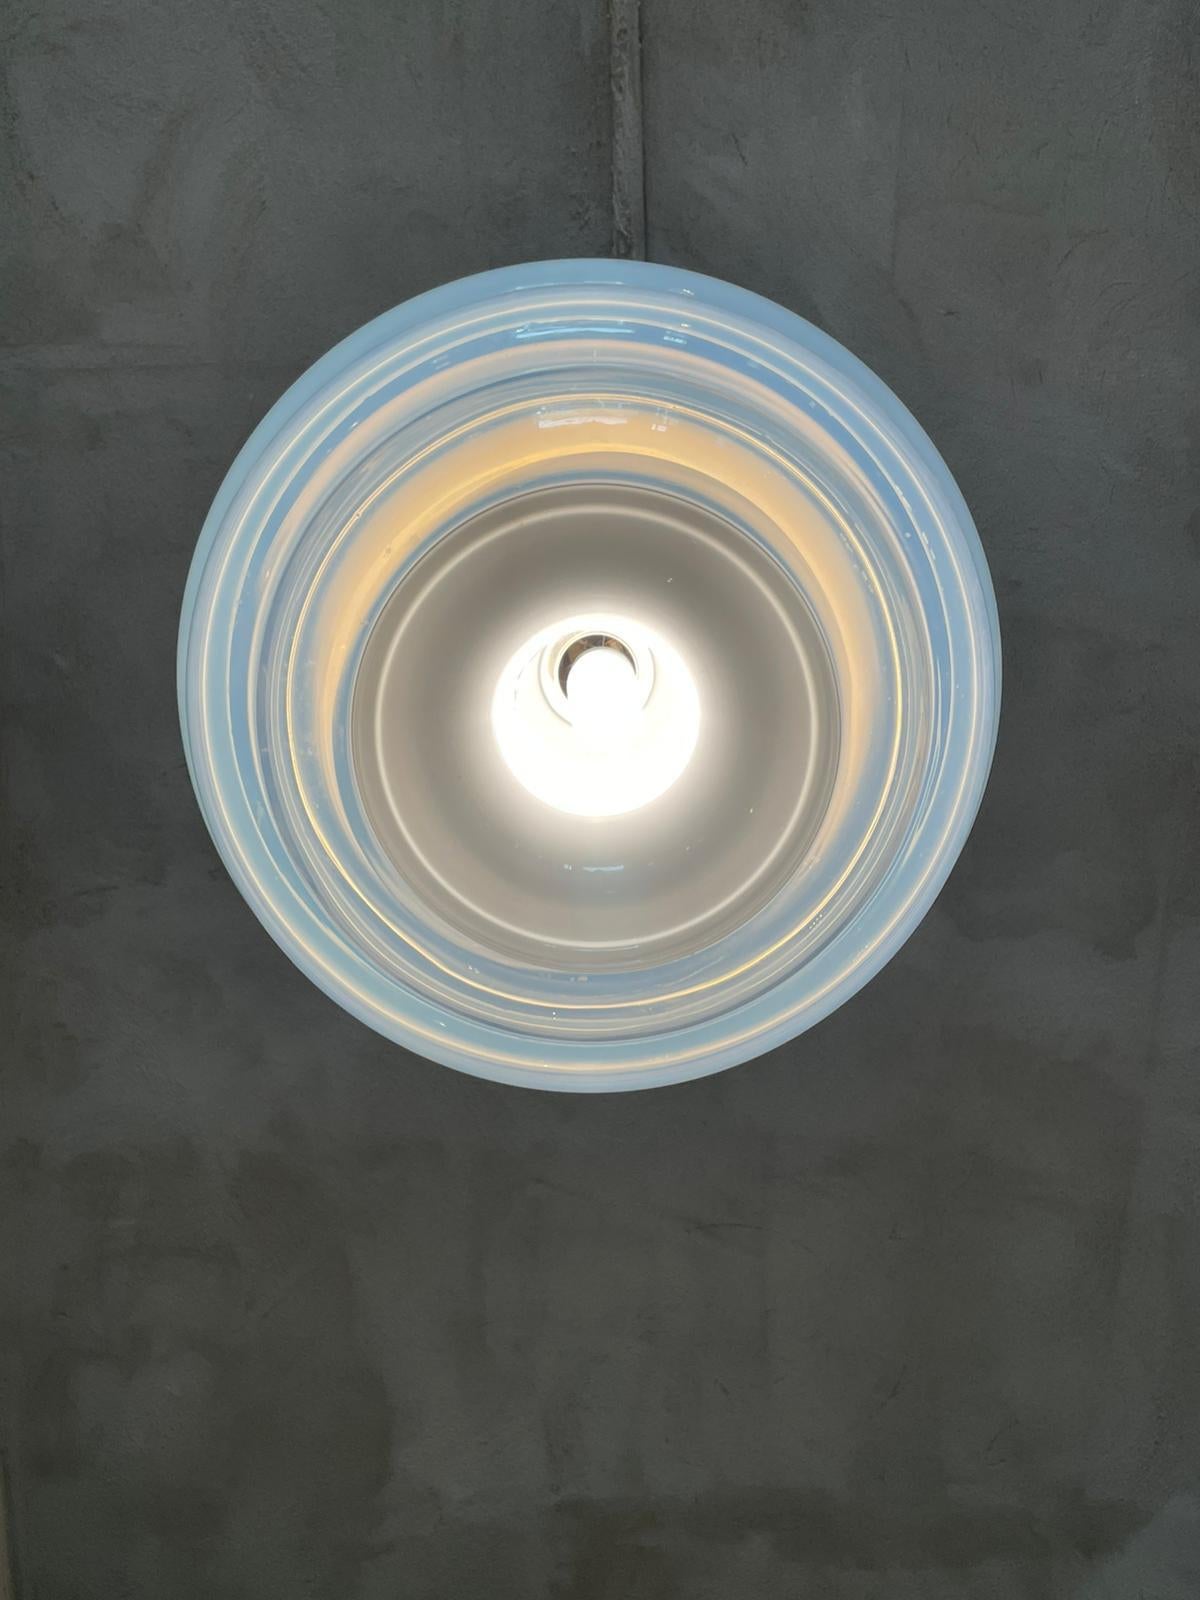 Mod. LS134 ceiling lamp designed by Carlo Nason and manufactured by Mazzega in Italy, 1969.
The elongated cylindrical white diffuser is located inside the chandelier which, thanks to its three particular concentric layers, gives a wavy movement to